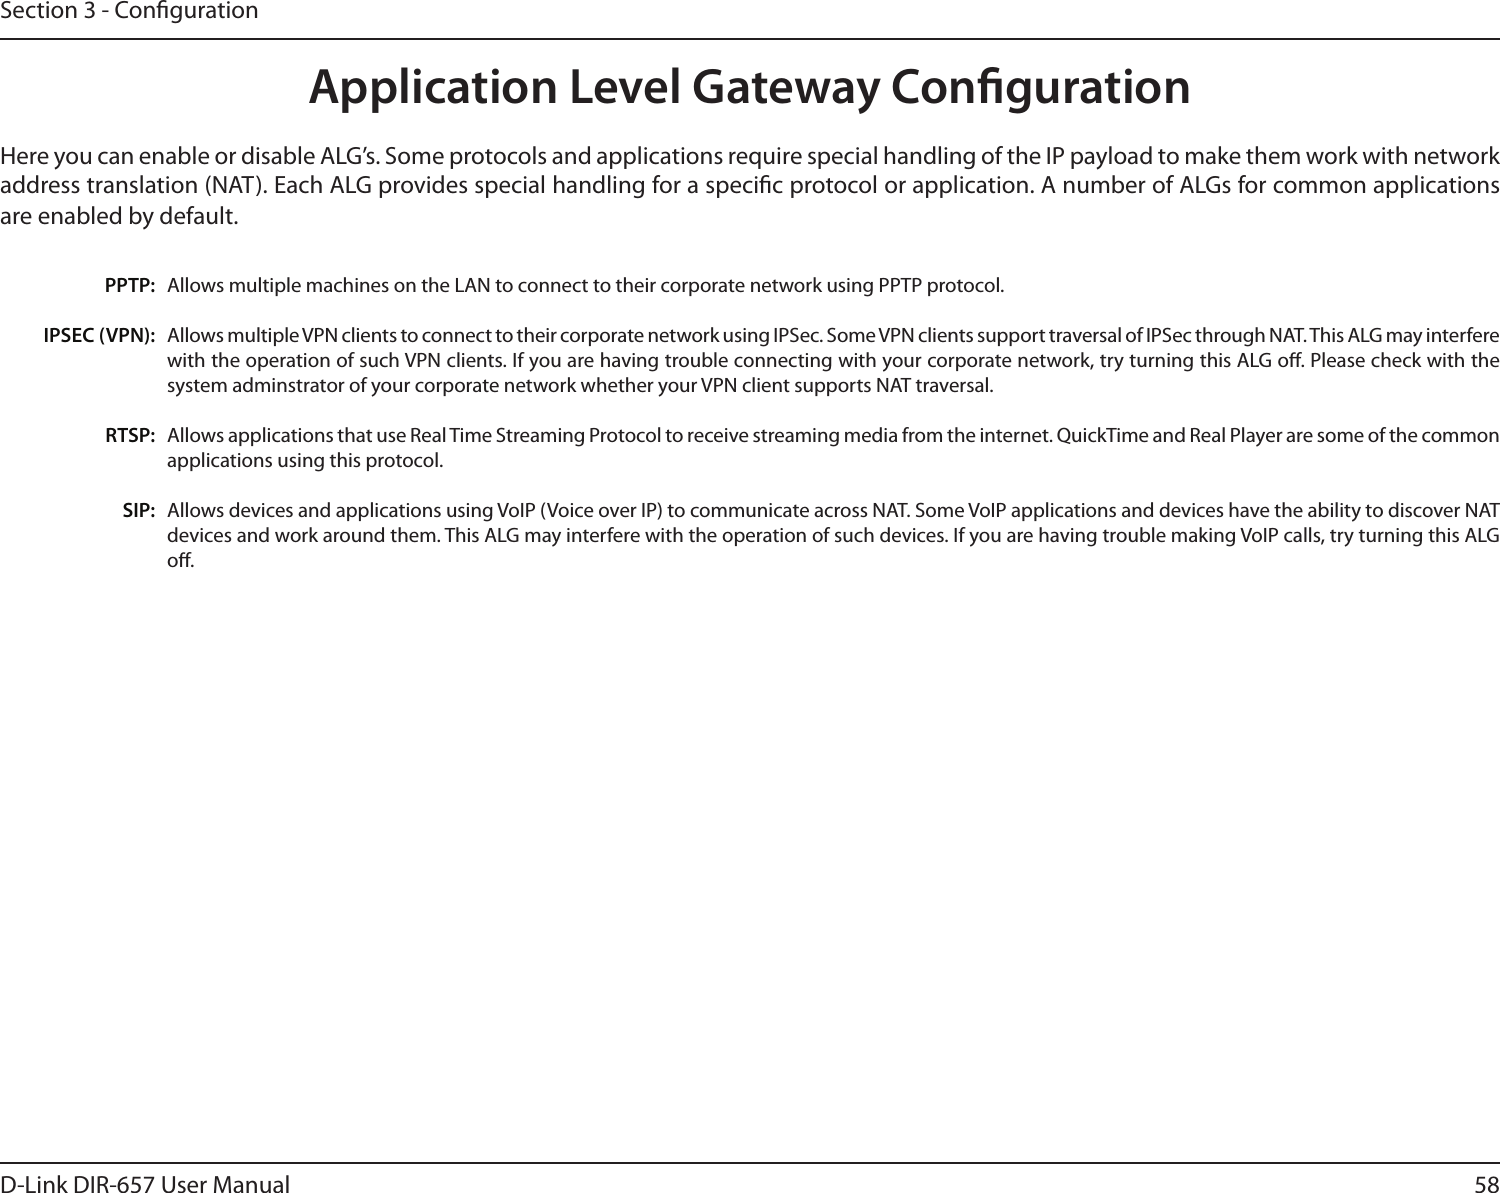 58D-Link DIR-657 User ManualSection 3 - CongurationApplication Level Gateway CongurationHere you can enable or disable ALG’s. Some protocols and applications require special handling of the IP payload to make them work with network address translation (NAT). Each ALG provides special handling for a specic protocol or application. A number of ALGs for common applications are enabled by default.Allows multiple machines on the LAN to connect to their corporate network using PPTP protocol. Allows multiple VPN clients to connect to their corporate network using IPSec. Some VPN clients support traversal of IPSec through NAT. This ALG may interfere with the operation of such VPN clients. If you are having trouble connecting with your corporate network, try turning this ALG o. Please check with the system adminstrator of your corporate network whether your VPN client supports NAT traversal.Allows applications that use Real Time Streaming Protocol to receive streaming media from the internet. QuickTime and Real Player are some of the common applications using this protocol. Allows devices and applications using VoIP (Voice over IP) to communicate across NAT. Some VoIP applications and devices have the ability to discover NAT devices and work around them. This ALG may interfere with the operation of such devices. If you are having trouble making VoIP calls, try turning this ALG o. PPTP:IPSEC (VPN):RTSP:SIP: